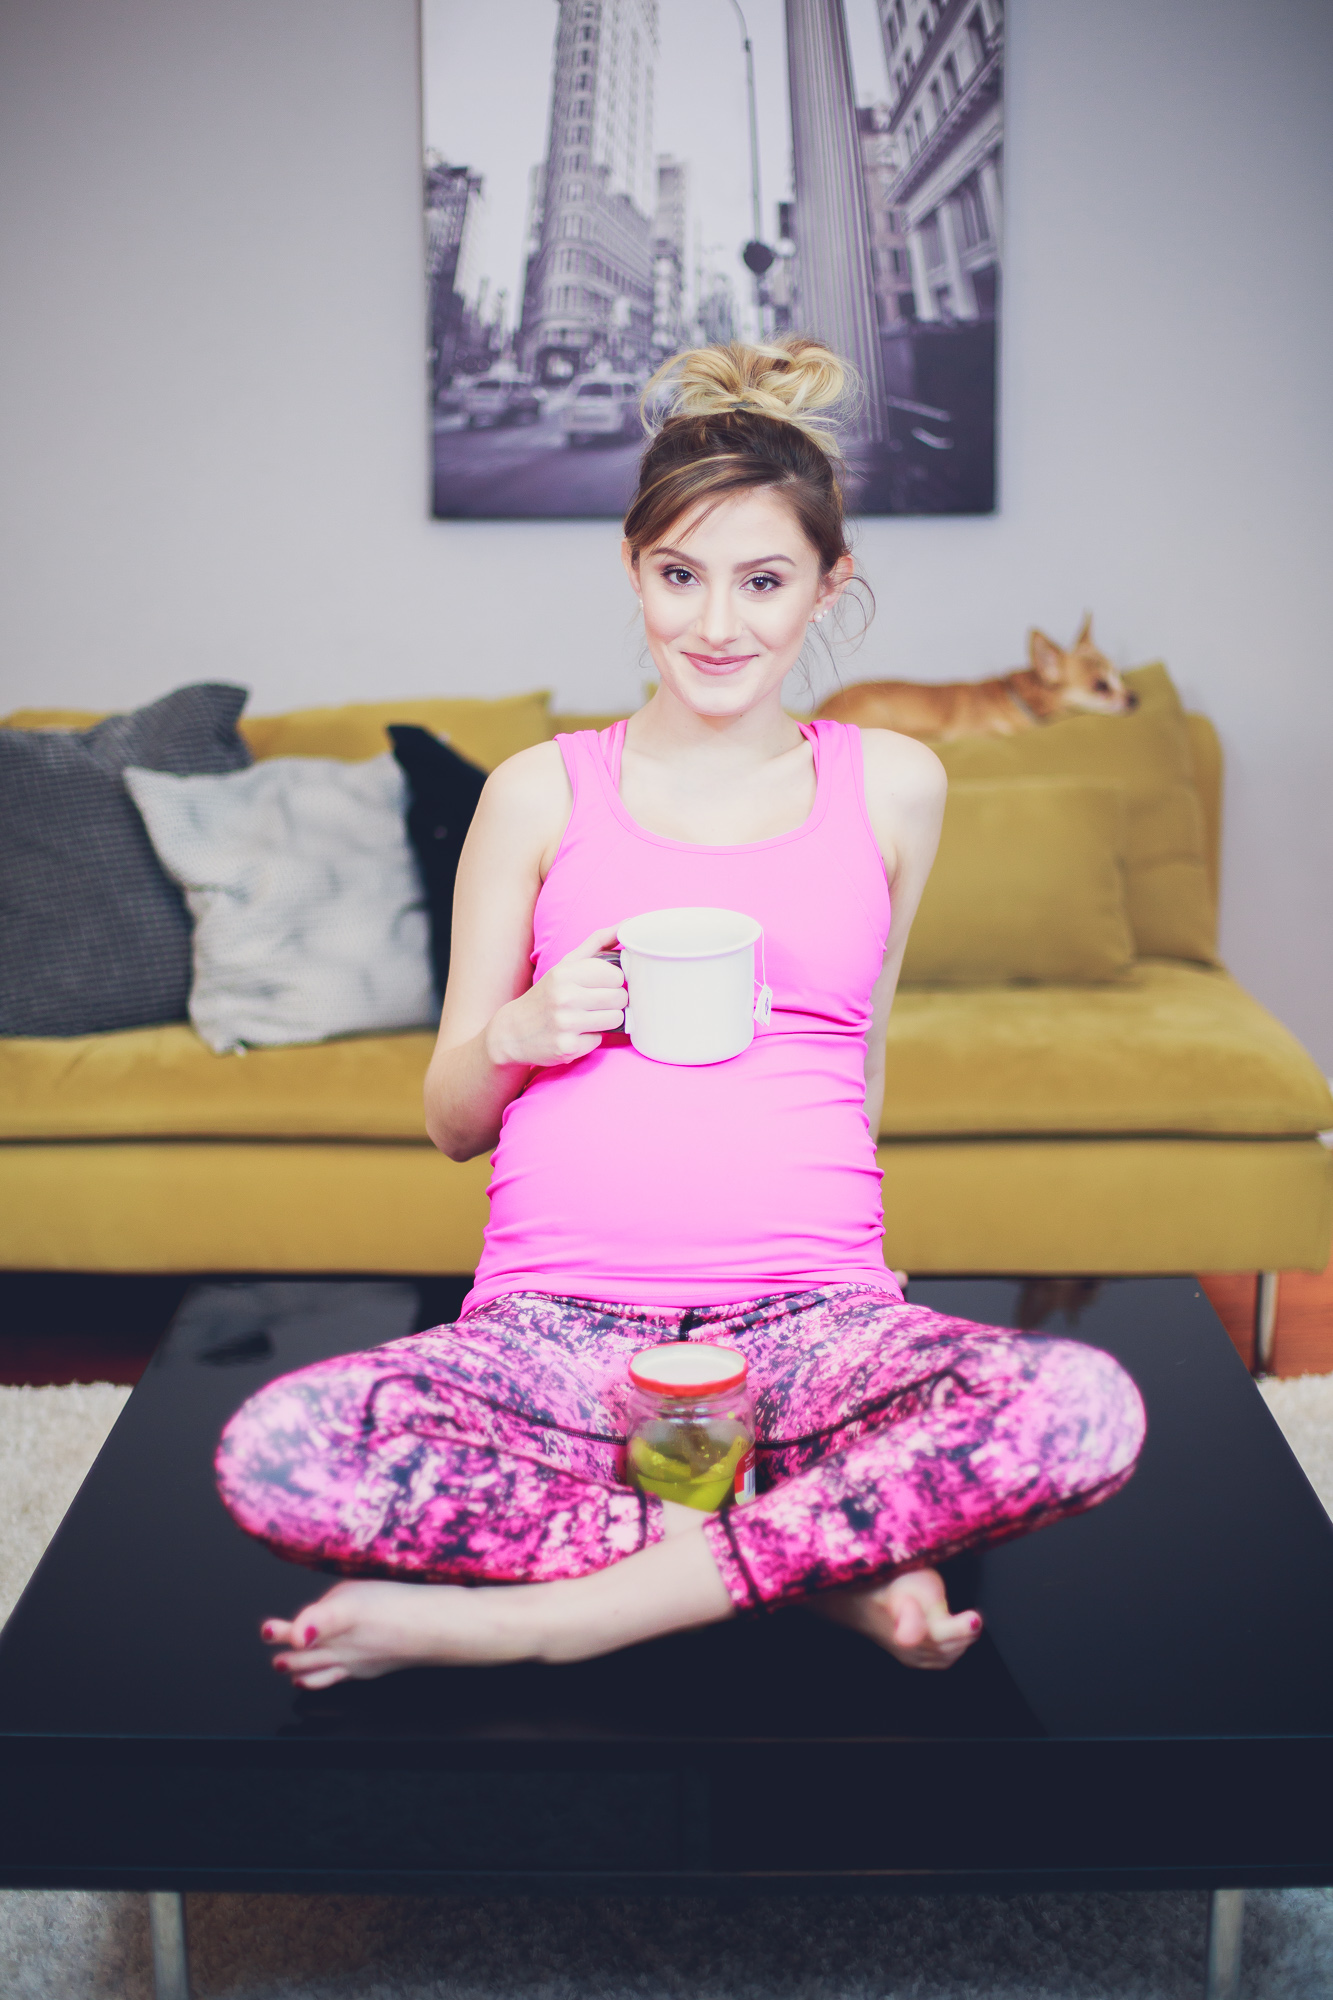 North Carolina Fashion, lifestyle, and beauty blogger Jessica Linn from Linn Style wearing POP! Maternity from Australia, a maternity fitness apparel company. Here are some pregnancy tips and tricks to help as you approach labor and to feel more comfortable. Yoga poses and tea to help prepare for an easier delivery.